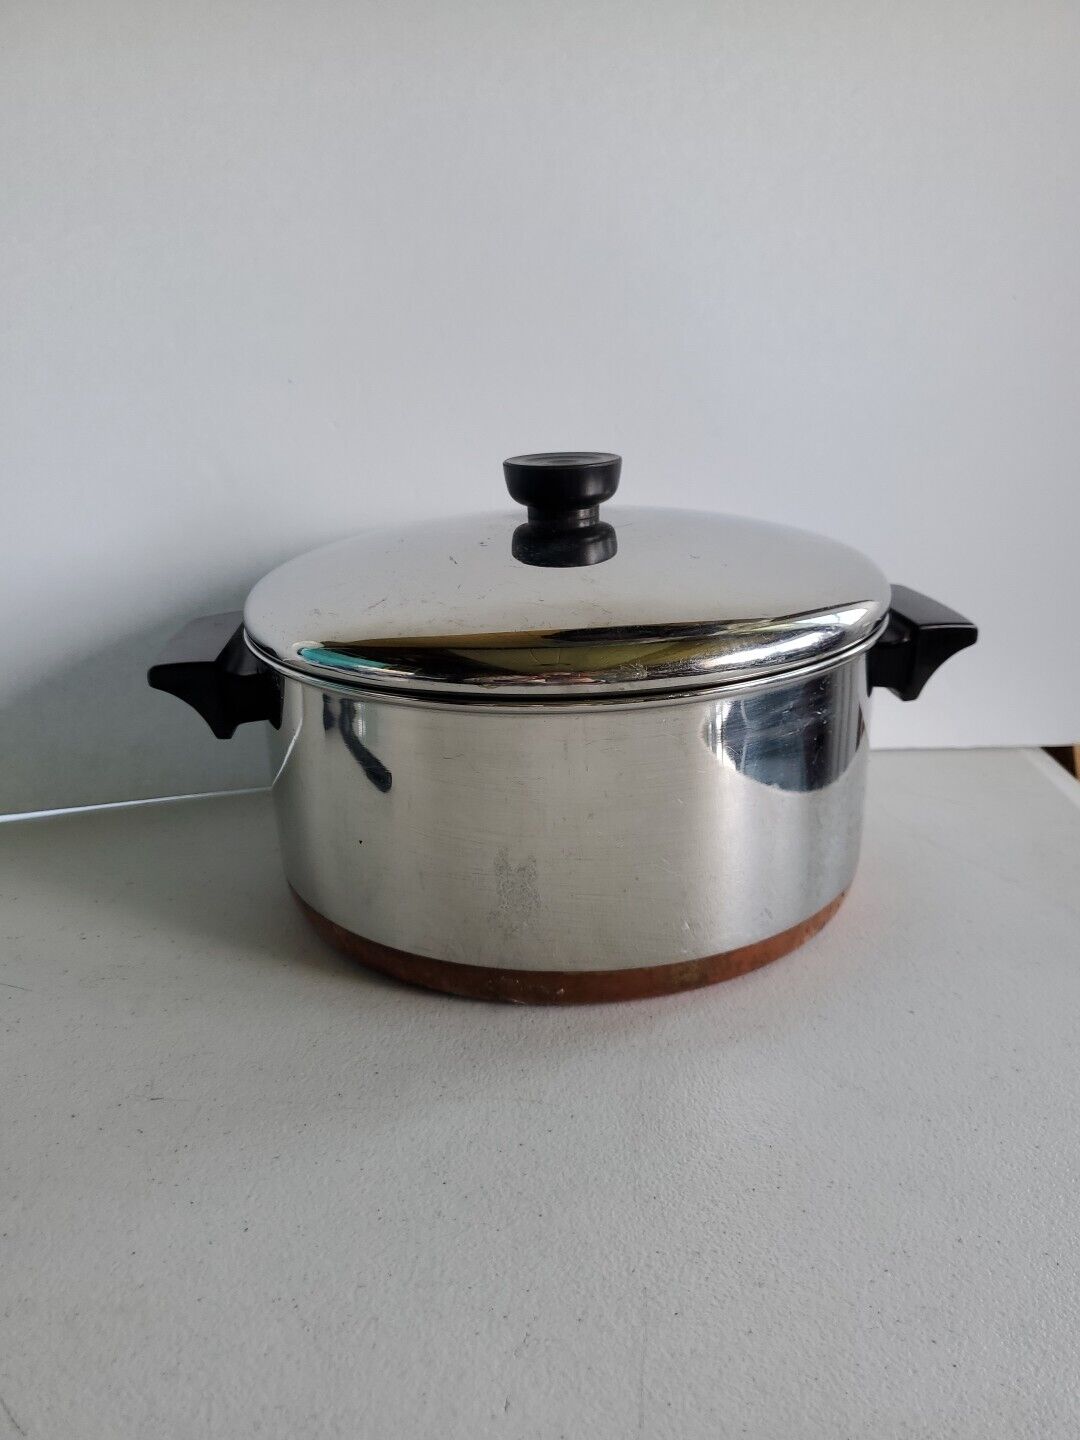 Vintage Revere Ware 4 1/2 Qt Stock Pot Dutch Oven w/ Lid Made in Clinton ILL